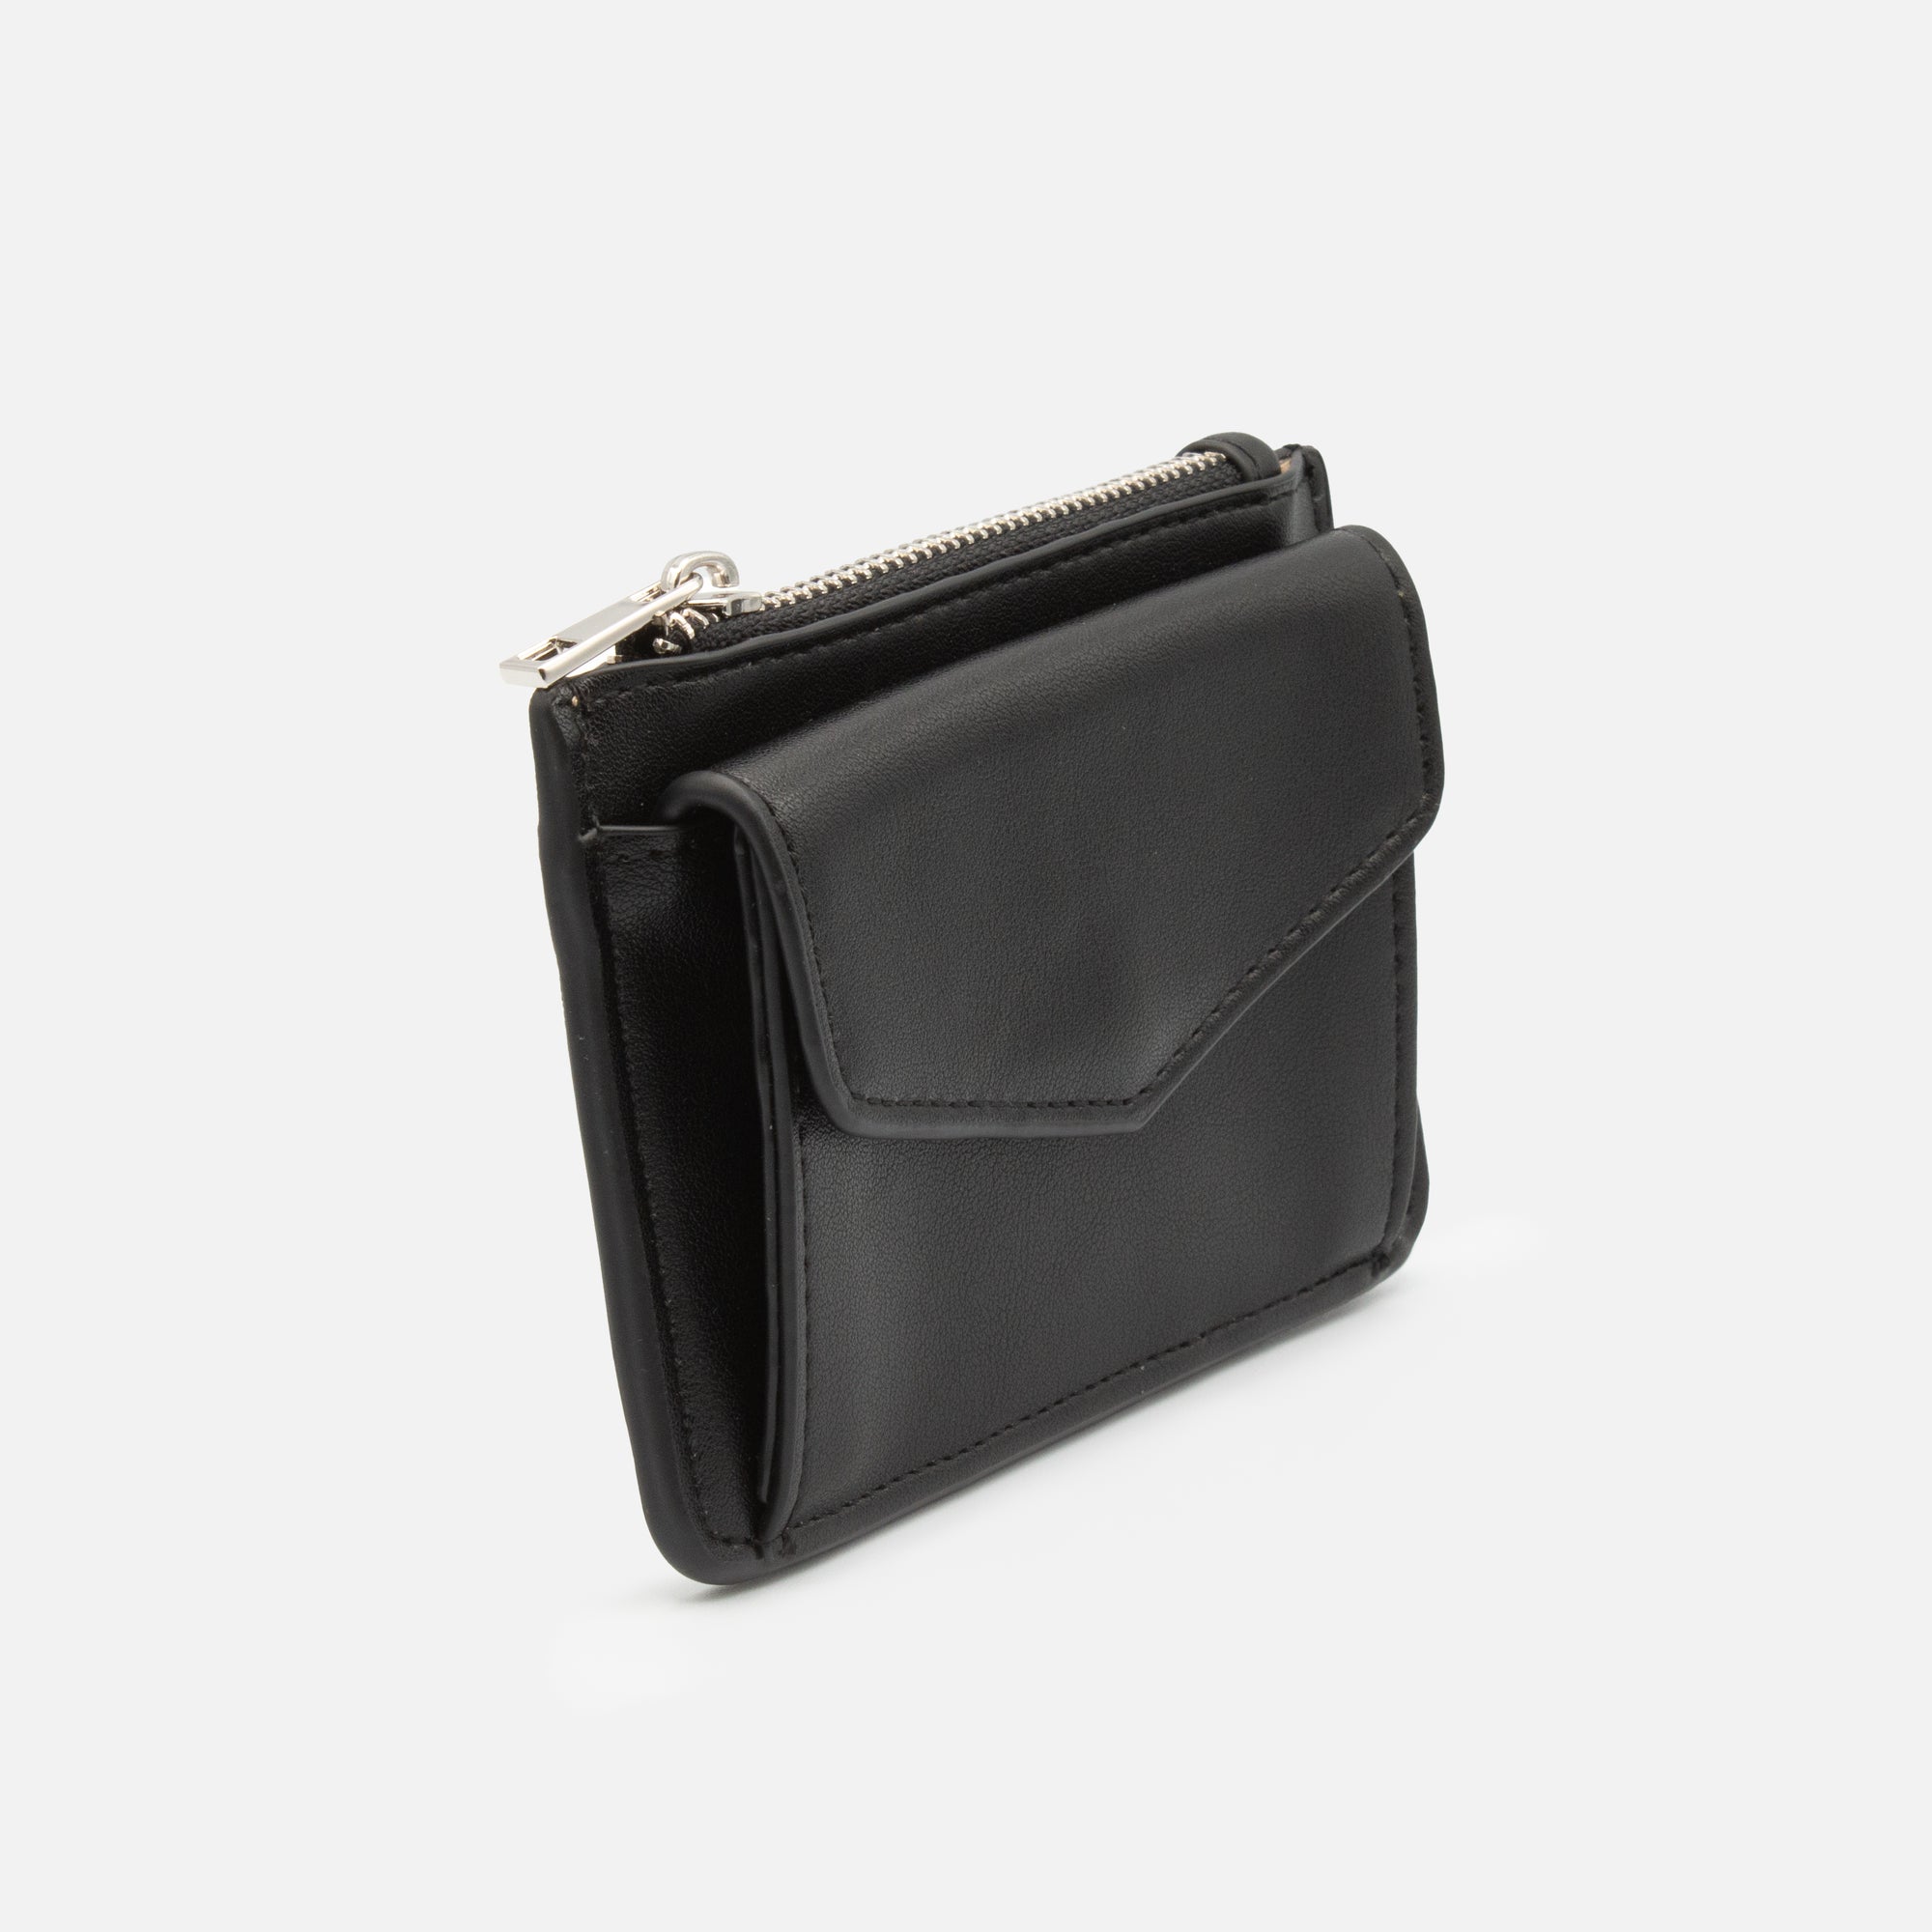 Small black card holder with zipper